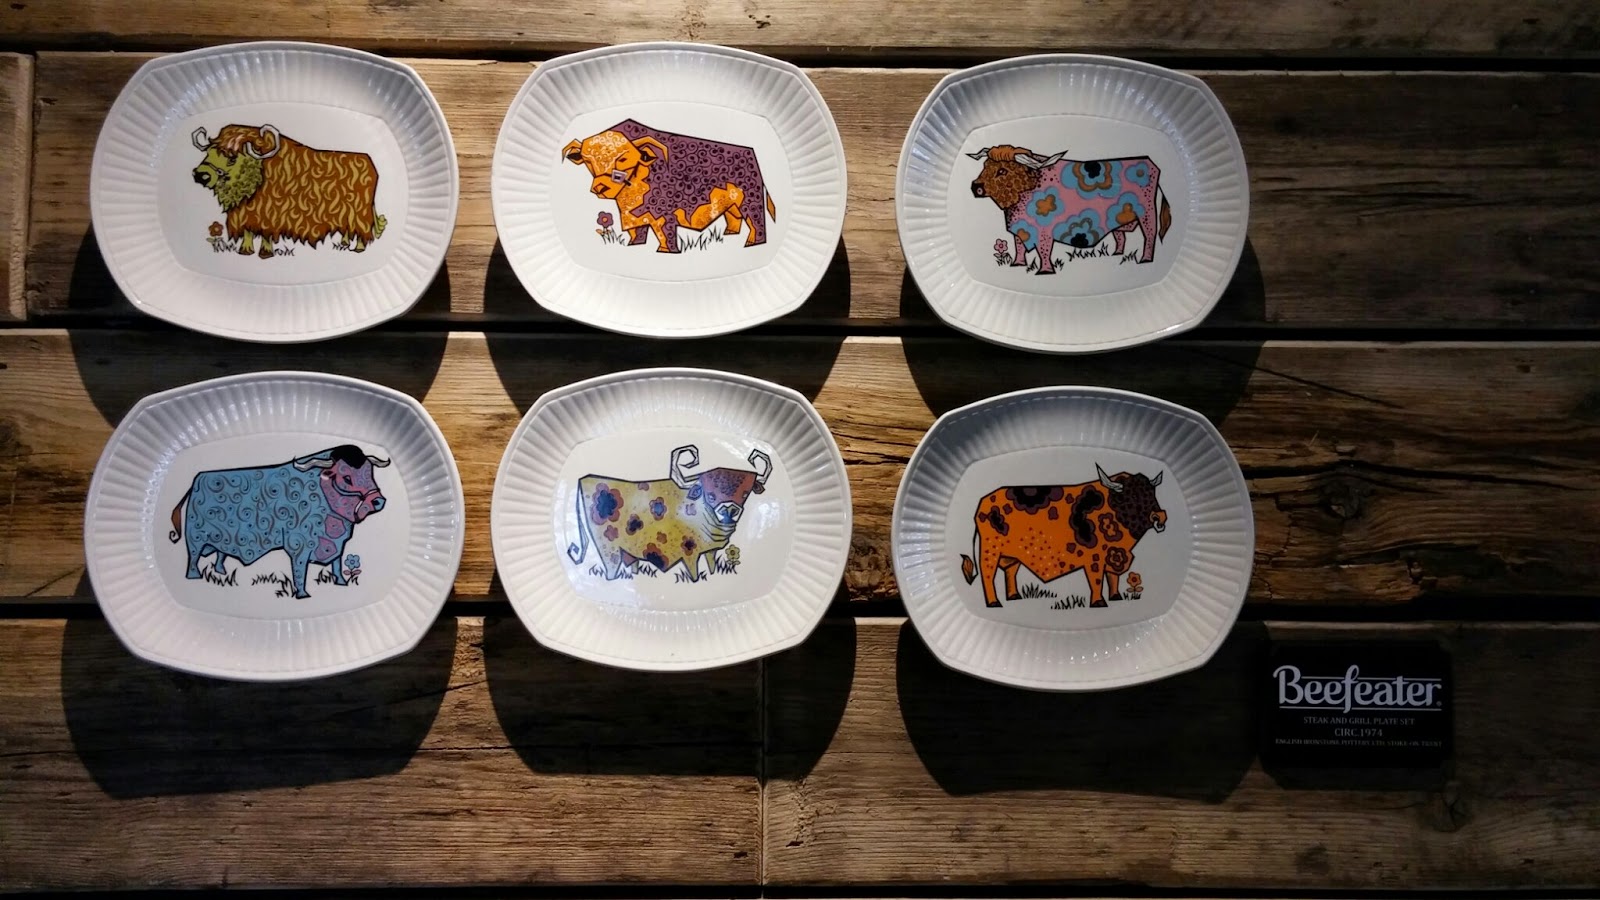 Beefeater plates